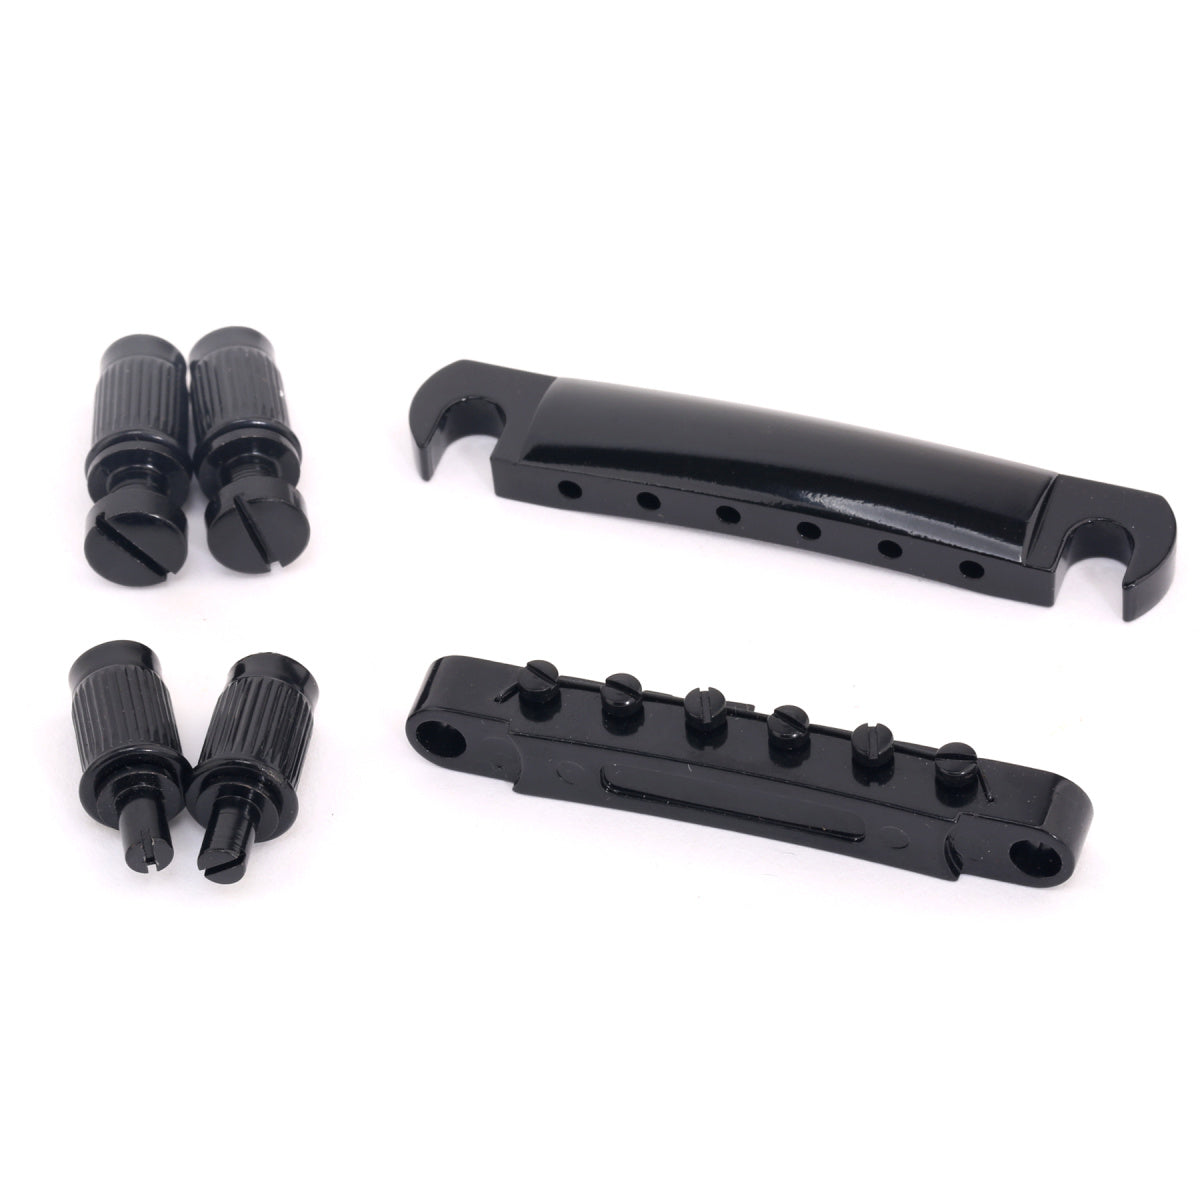 Musiclily ABR-1 Style Tune-o-matic Bridge and Tailpiece Set for Les Paul Style Guitar,Black